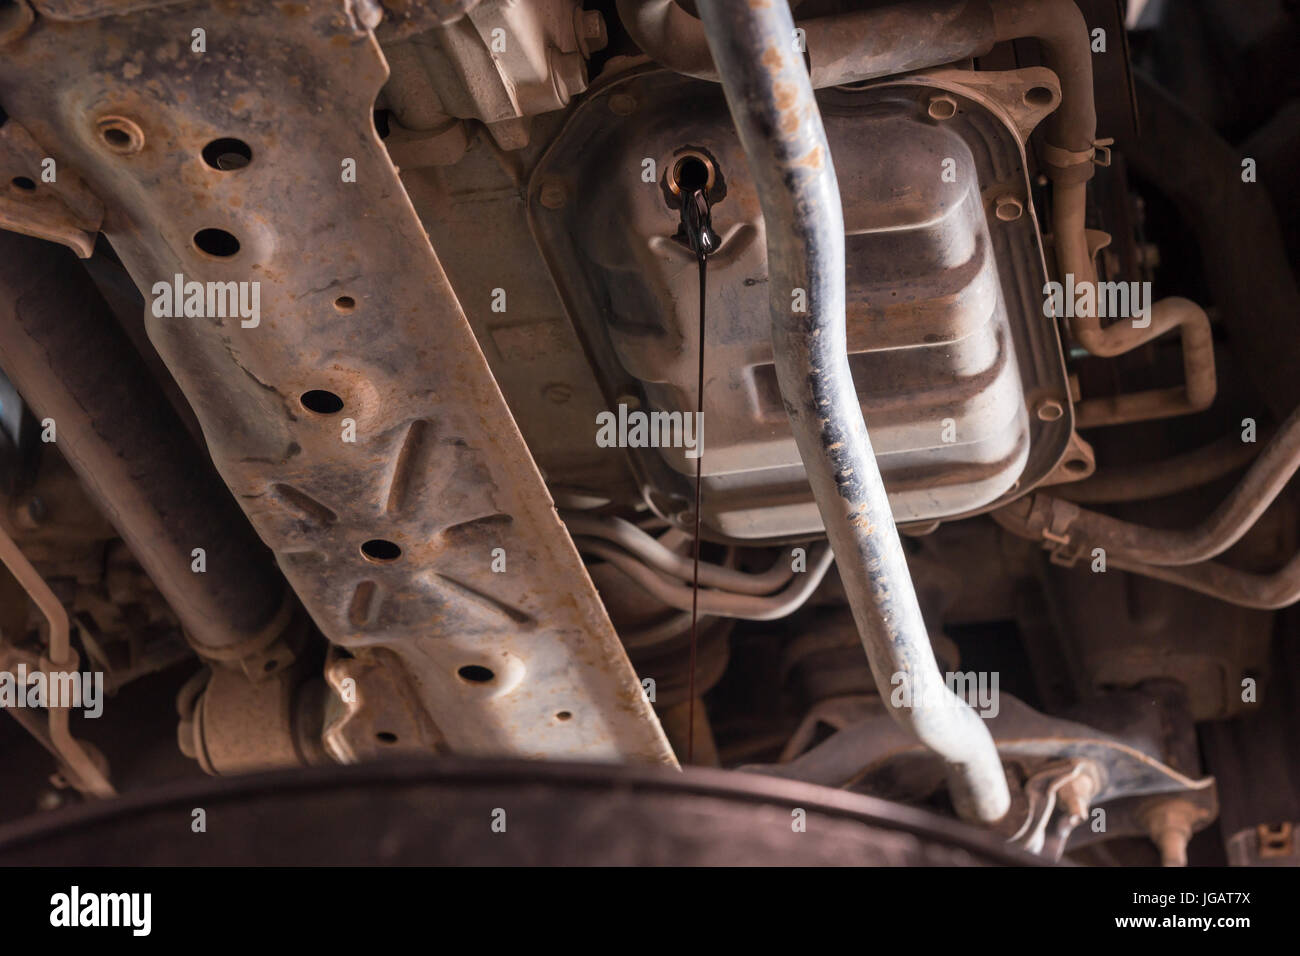 Oil flows out from automobile engine in a car workshop Stock Photo